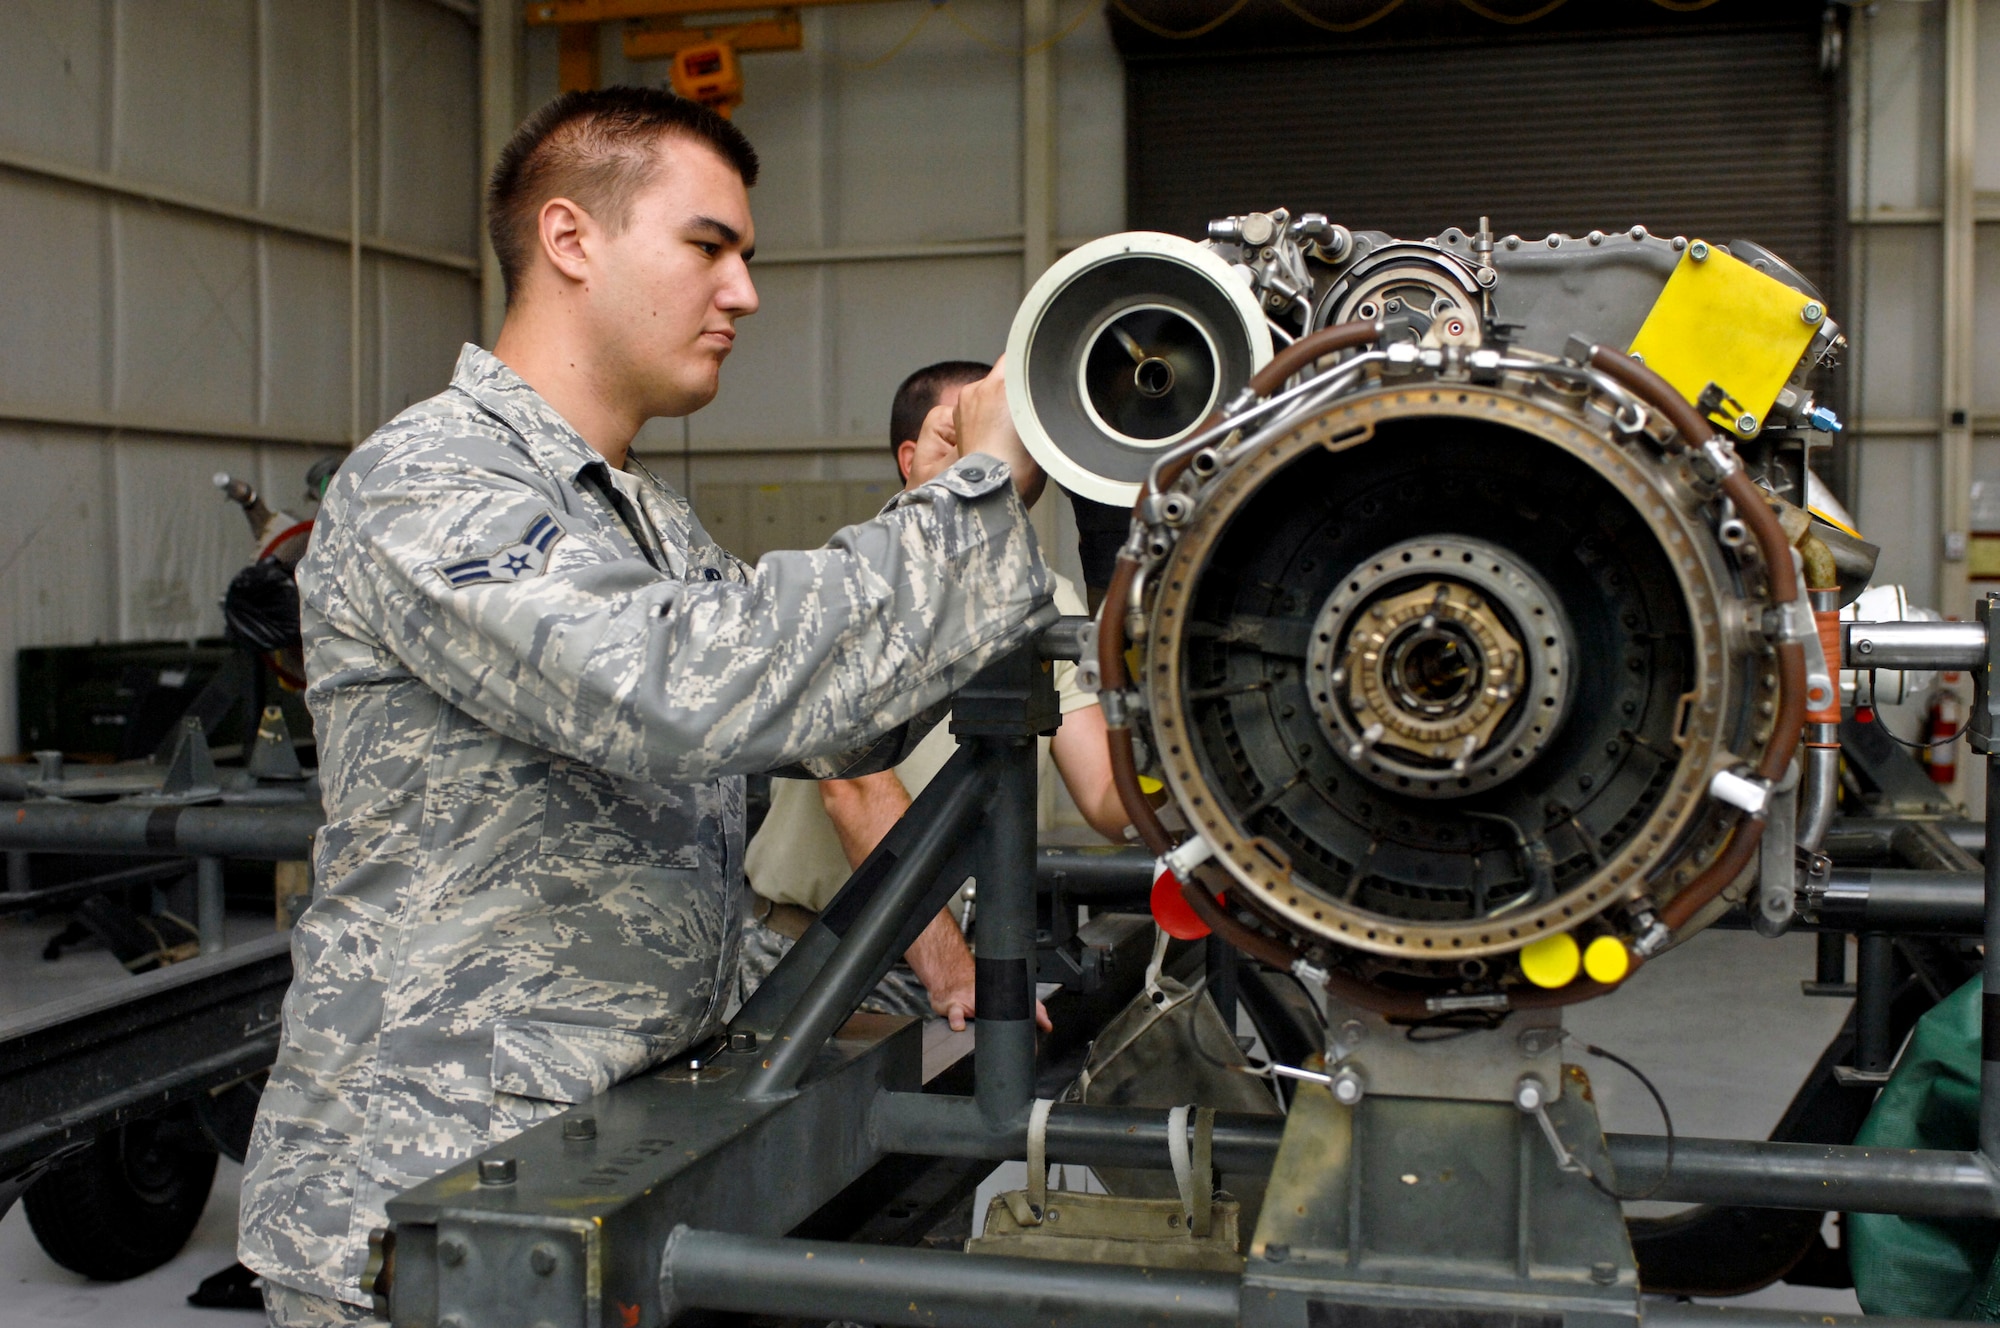 Airman 1st Class Dan Baldridge, 823rd Maintenance Squadron aerospace propulsion technician, takes apart an HH-60 helicopter engine for repairs July 25, 2012, at Nellis Air Force Base, Nev. The 823rd technicians are responsible for back shop, flight line and phase repair work. (U.S. Air Force photo by Senior Airman Jack Sanders)